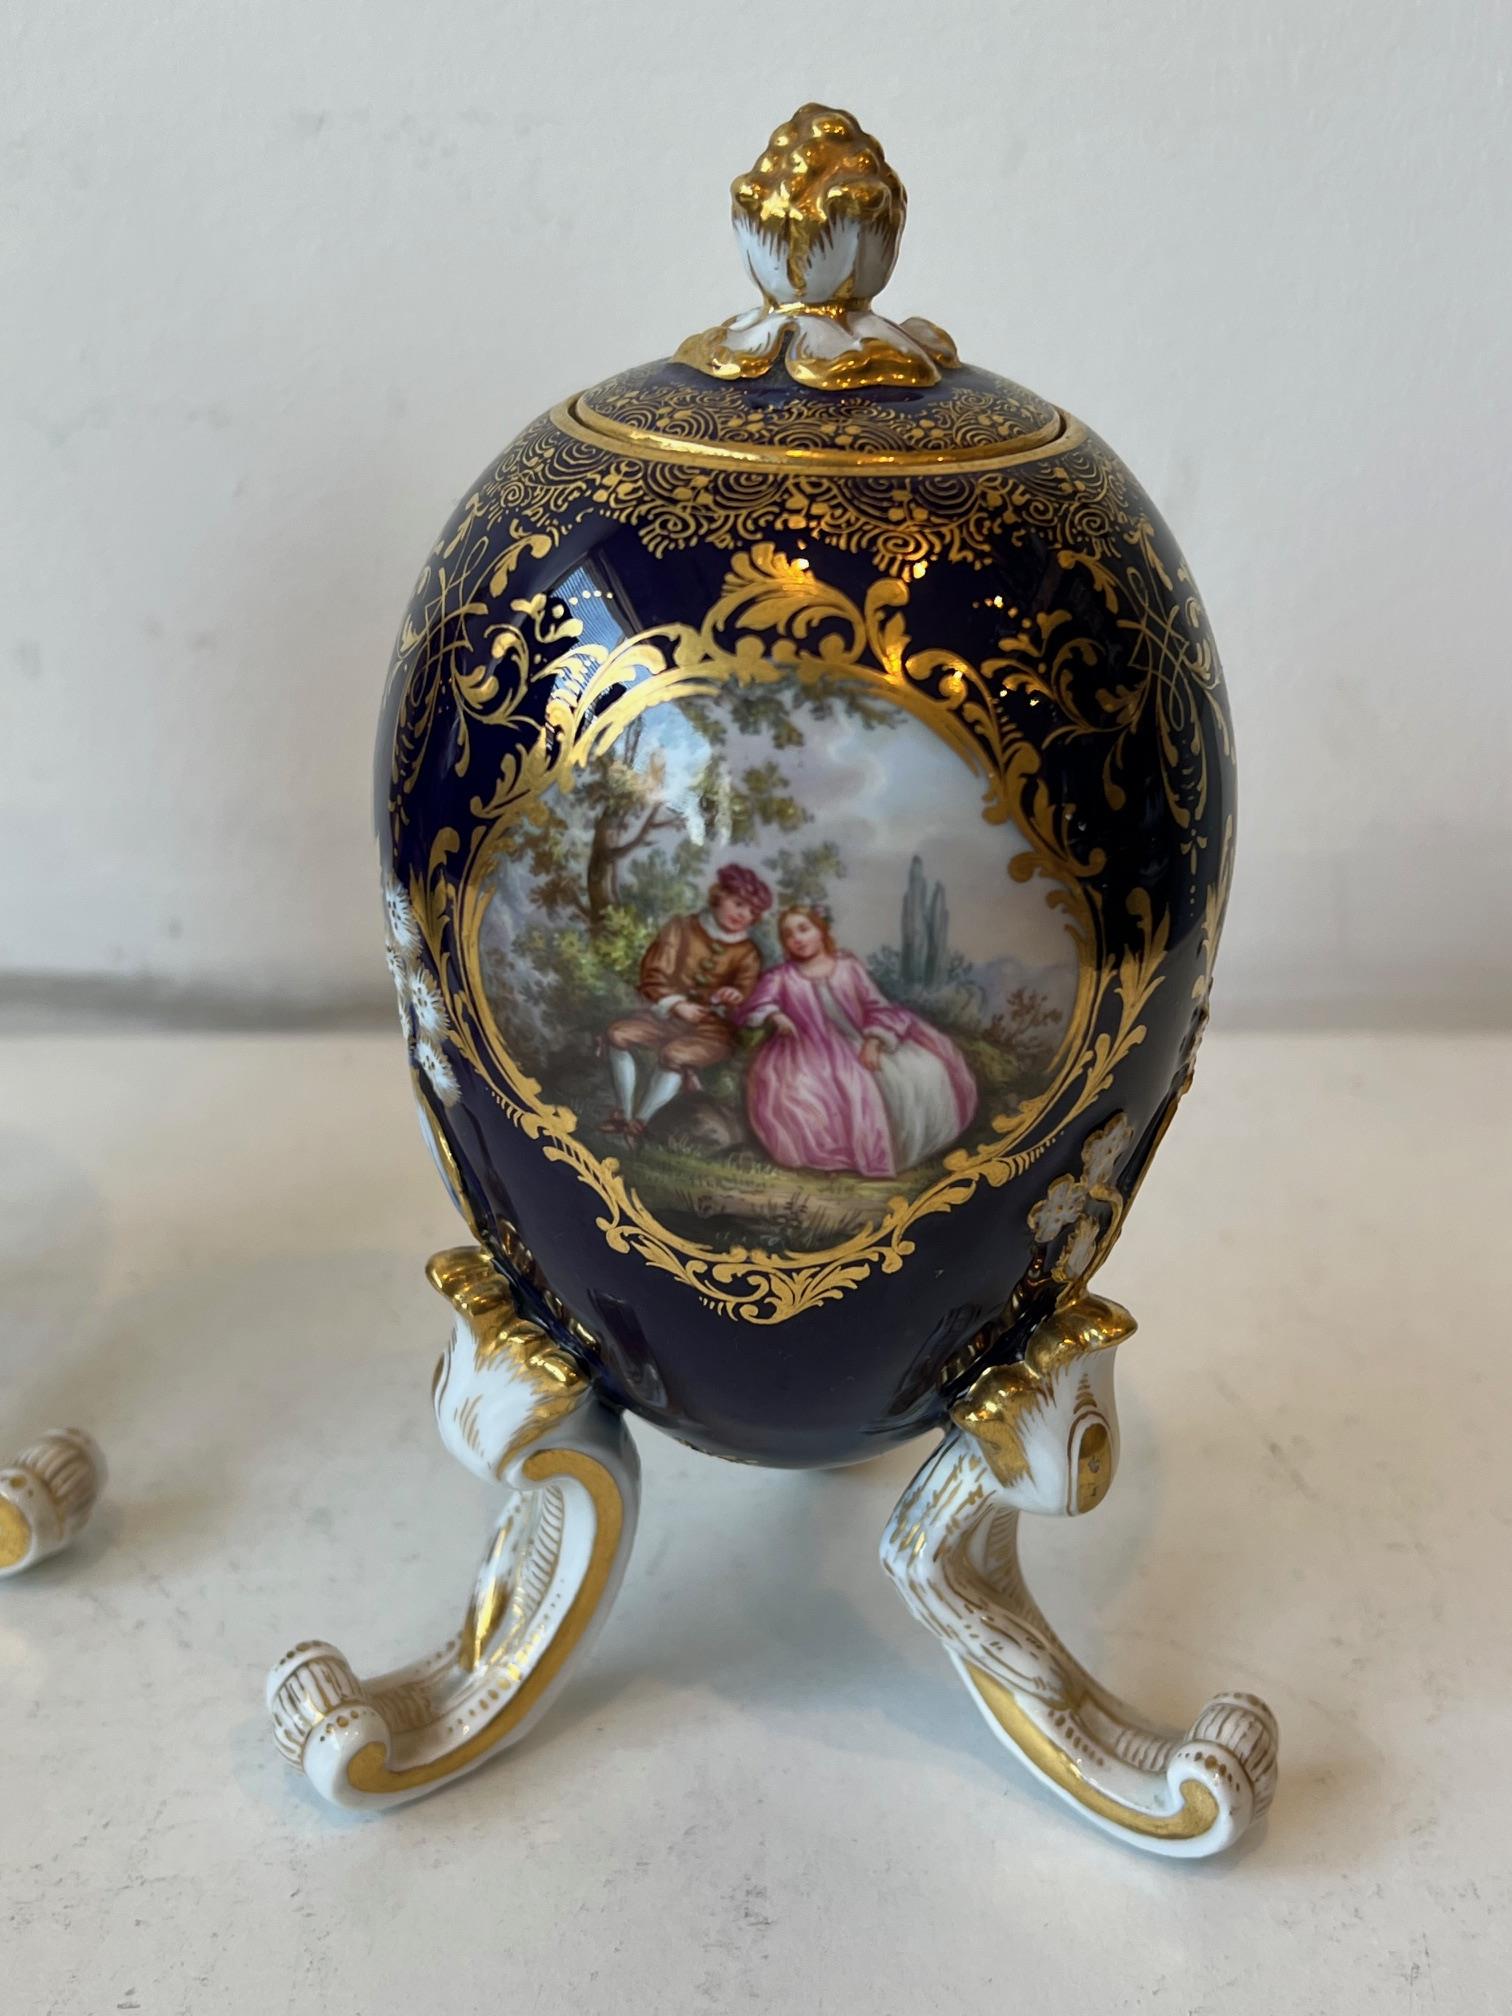 MEISSEN: A PAIR OF LATE 19TH / EARLY 20TH CENTURY PORCELAIN EGG SHAPED TEA CADDIES - Image 13 of 16